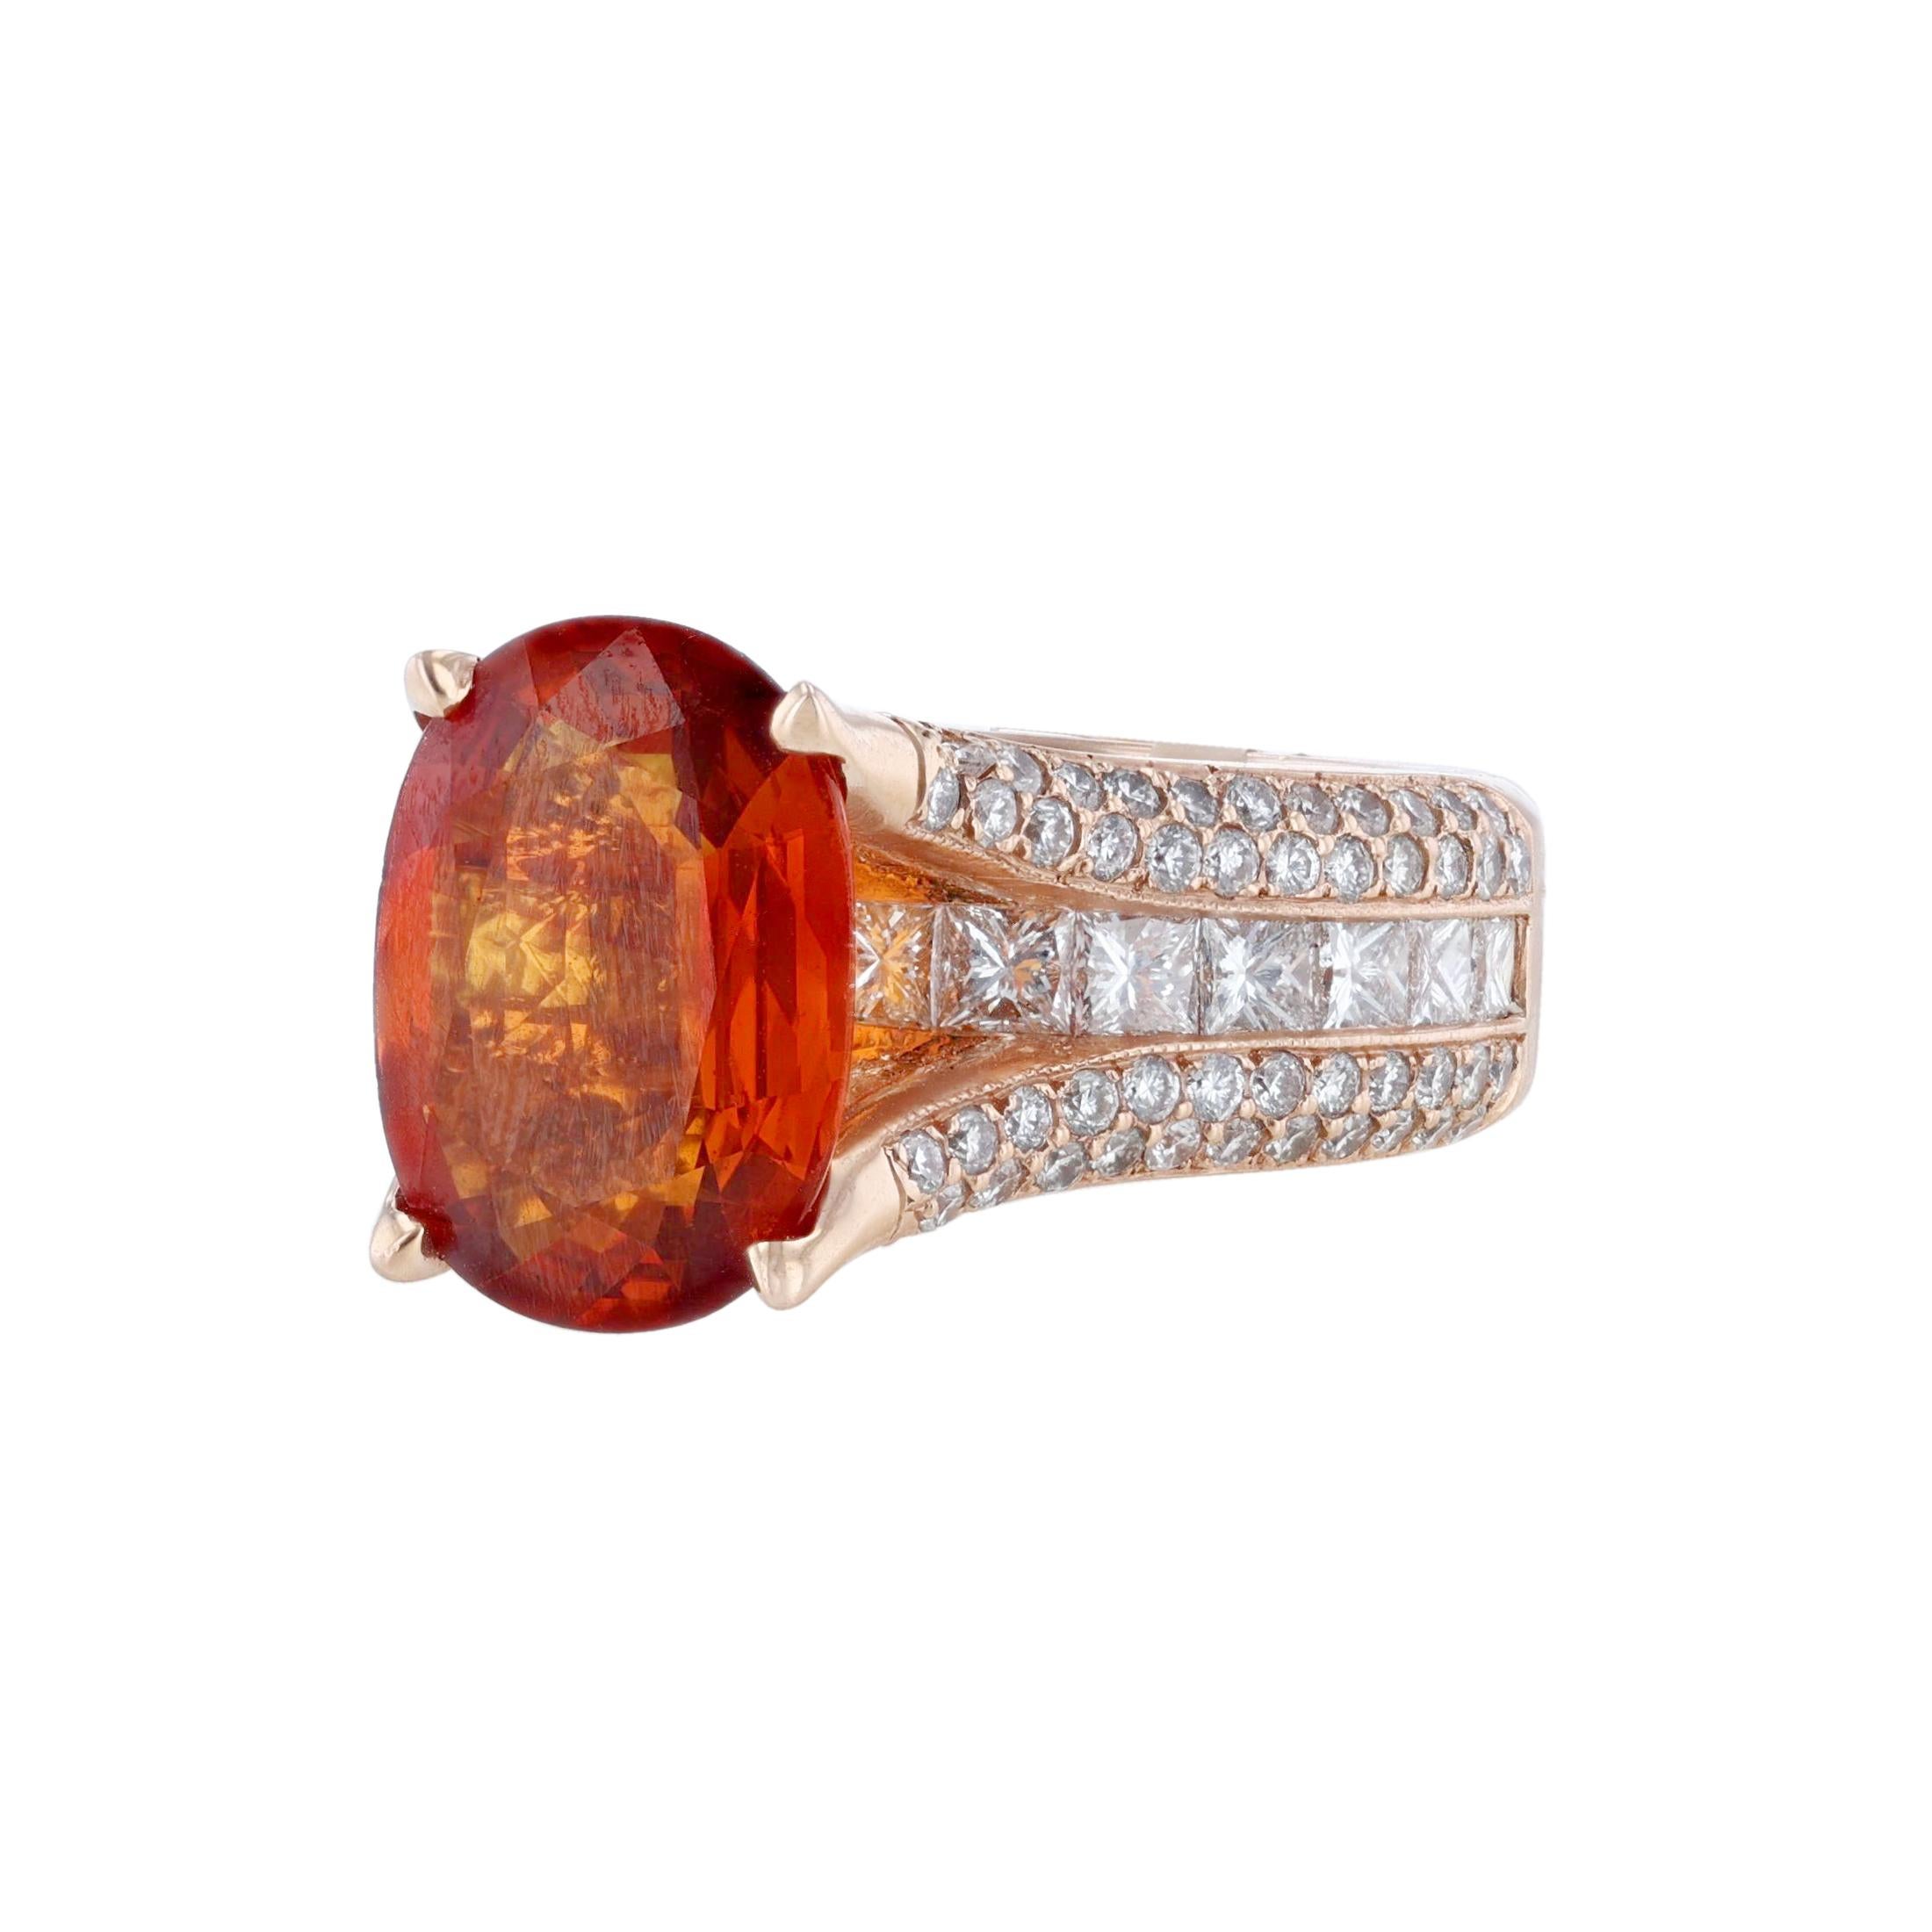 This ring is in 14K rose gold. It features 1 oval-cut orange sapphire, prong set weighing 5.03. With 4 rows of 106 round cut, prong and bezel diamonds weighing 1.14 carats. And a center row of 15 princess cut, channel set diamonds. With a color